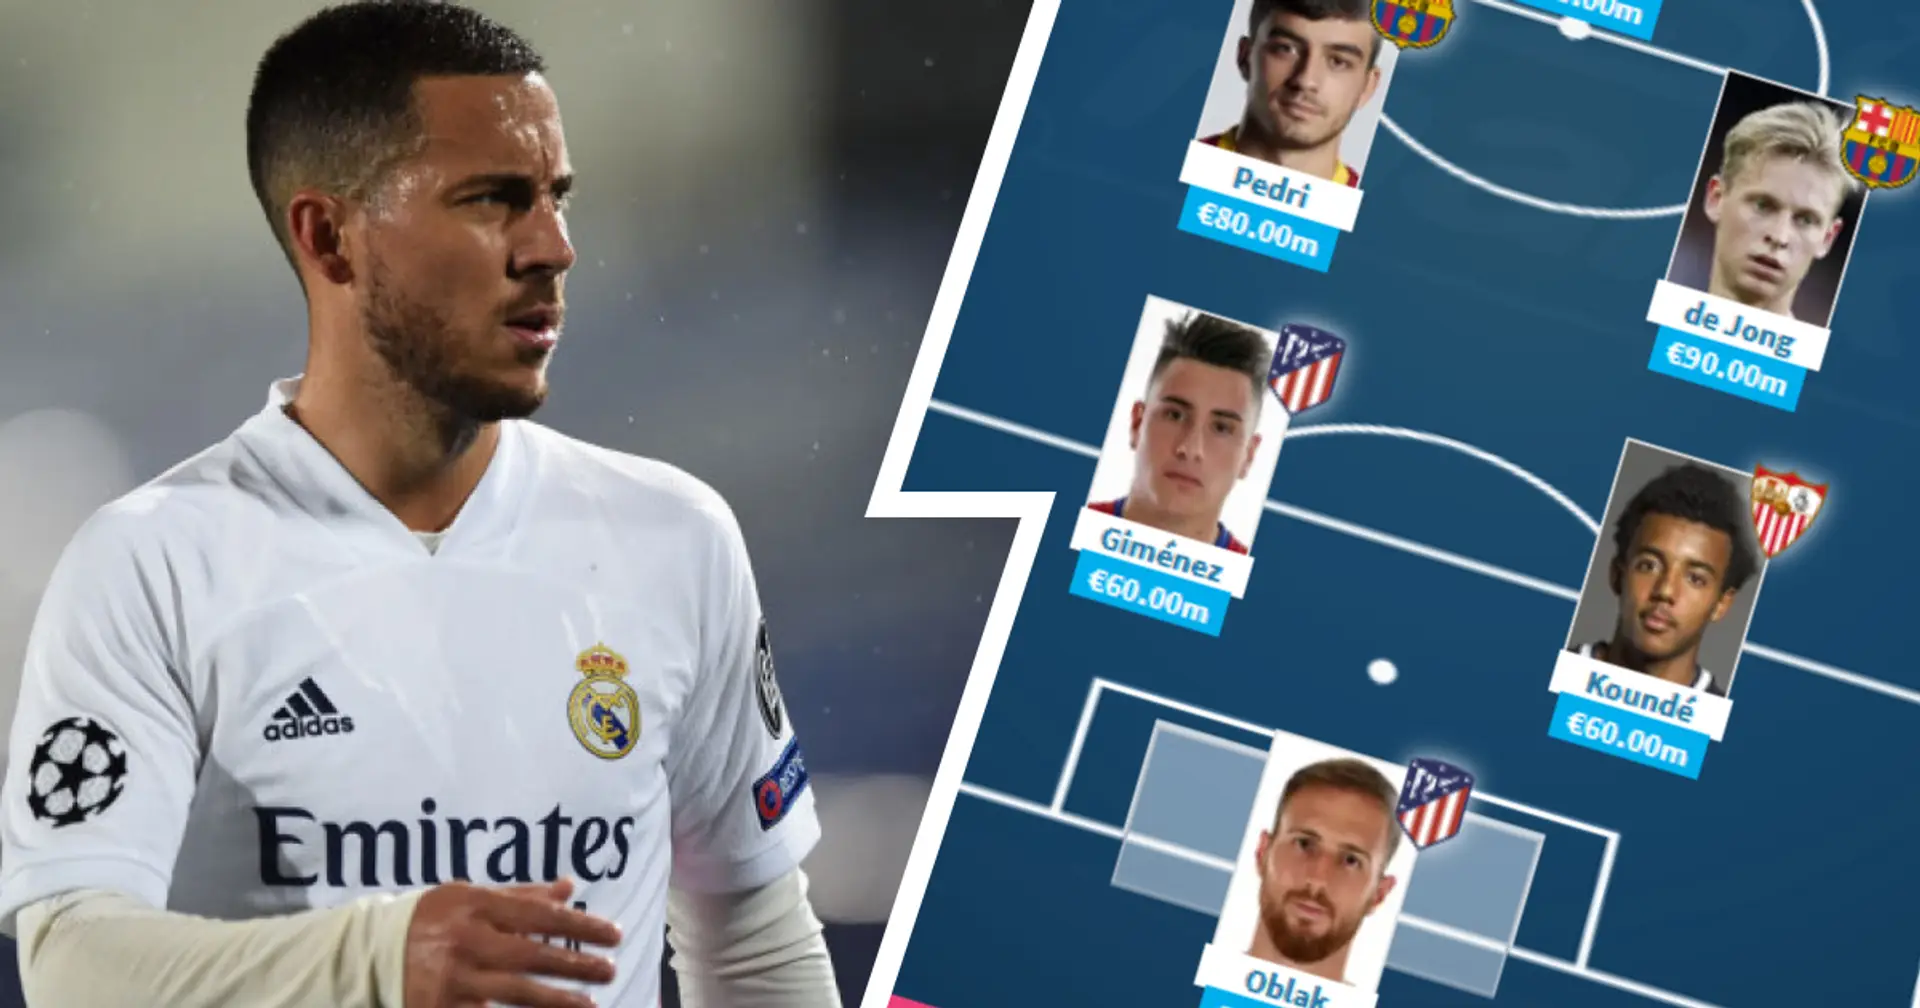 Hazard, Bale excluded: Only 2 Real Madrid players make La Liga most expensive XI